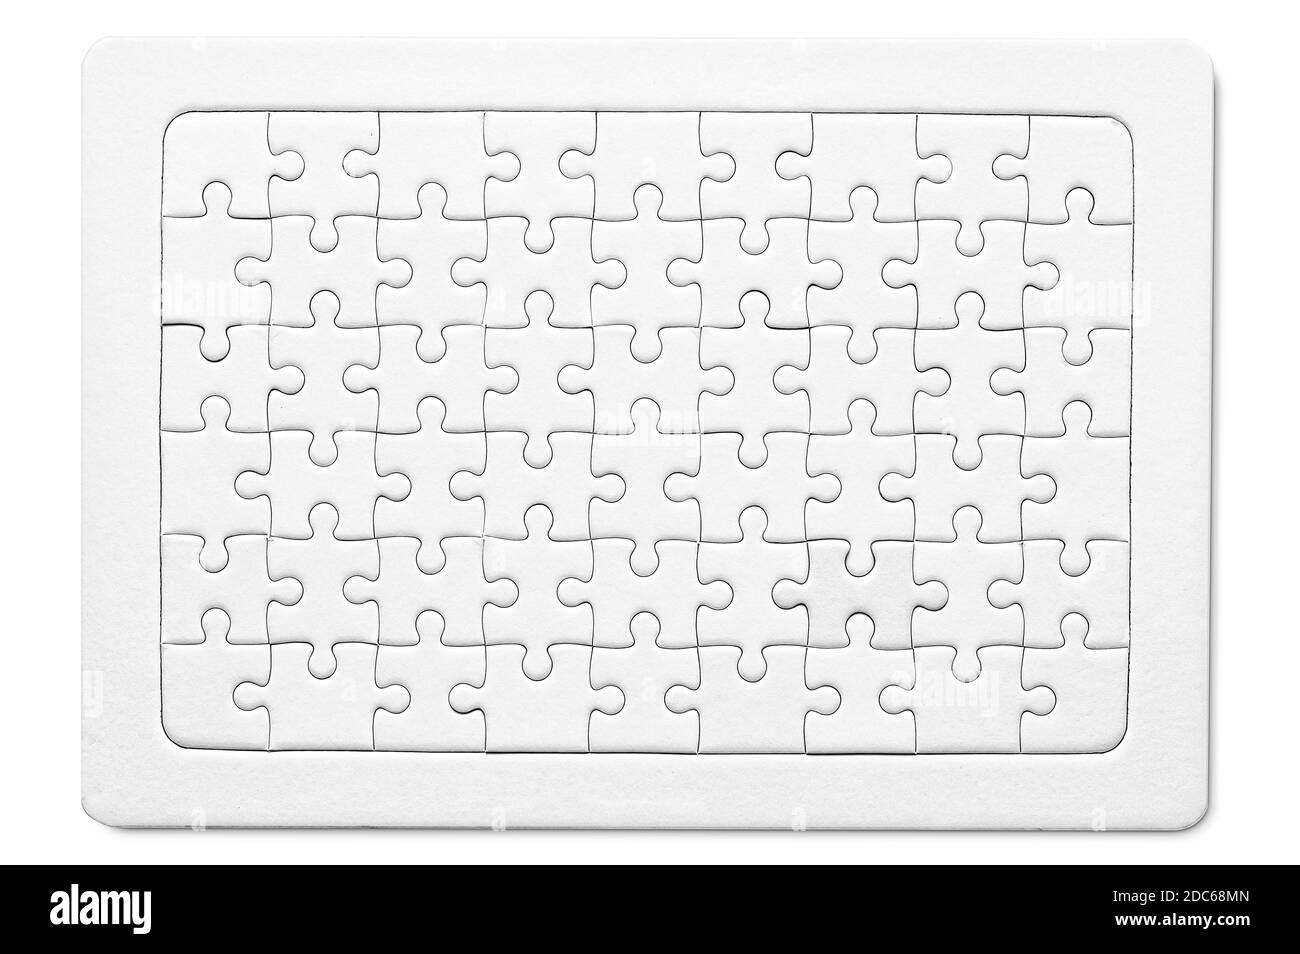 Jigsaw Puzzle Pieces Black and White Stock Photos & Images - Alamy Within Jigsaw Puzzle Template For Word